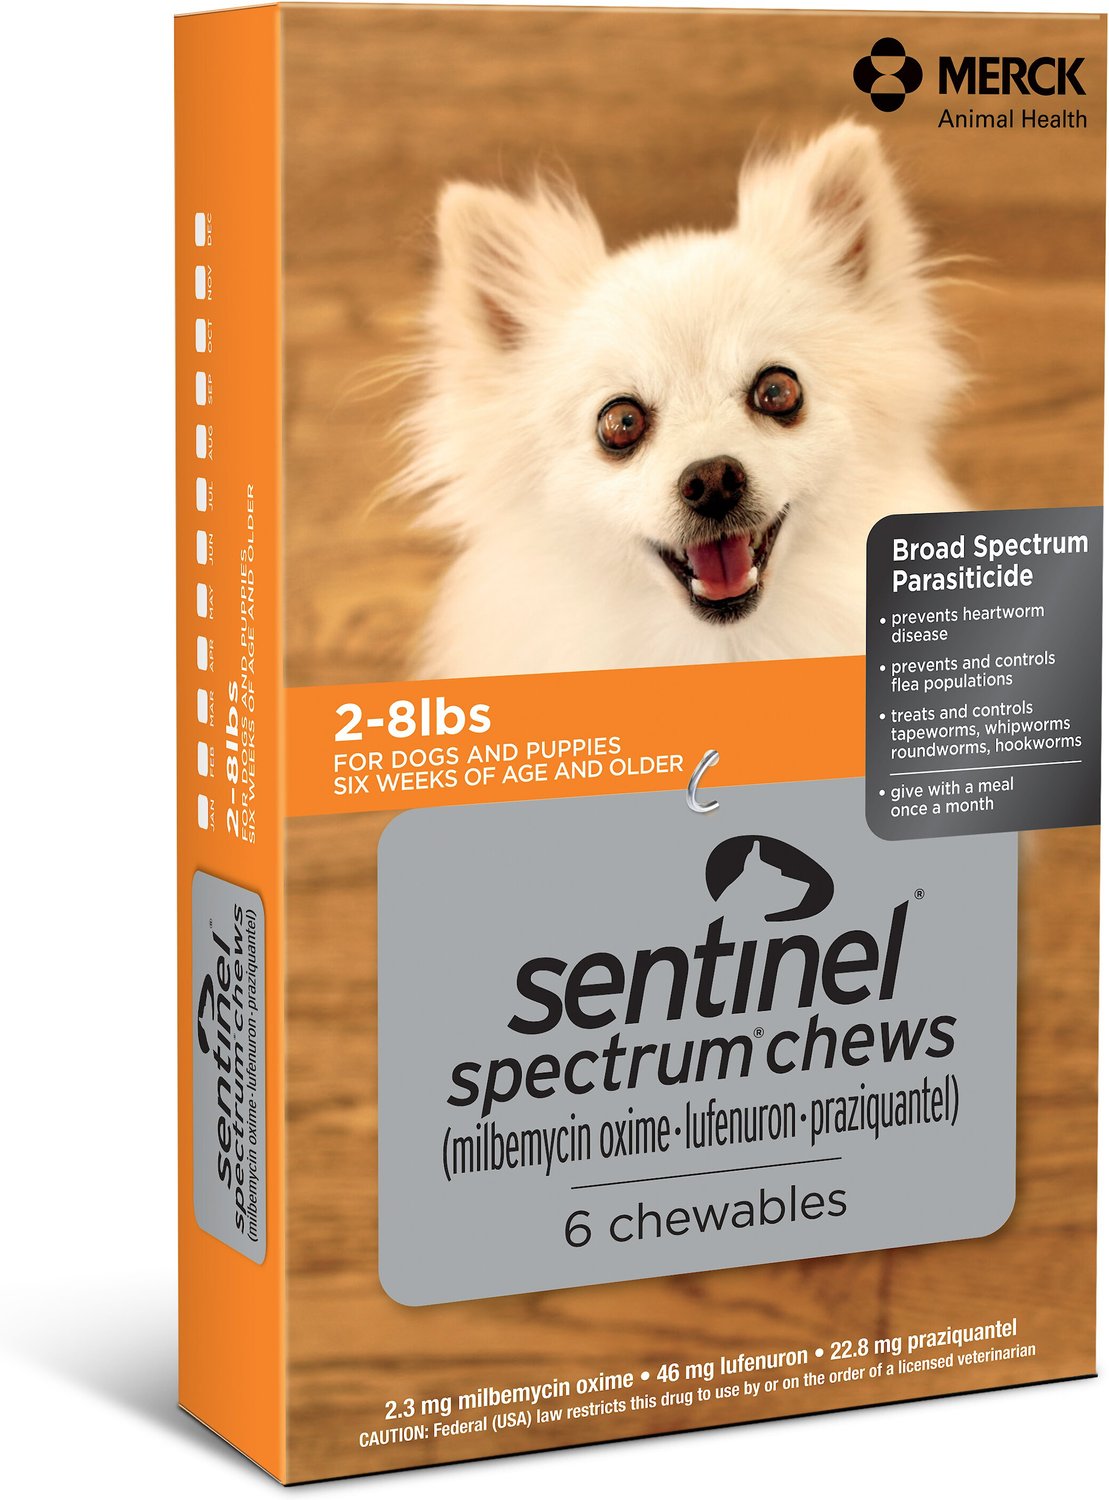 sentinel-spectrum-chewable-tablets-for-dogs-2-8-lbs-6-treatments